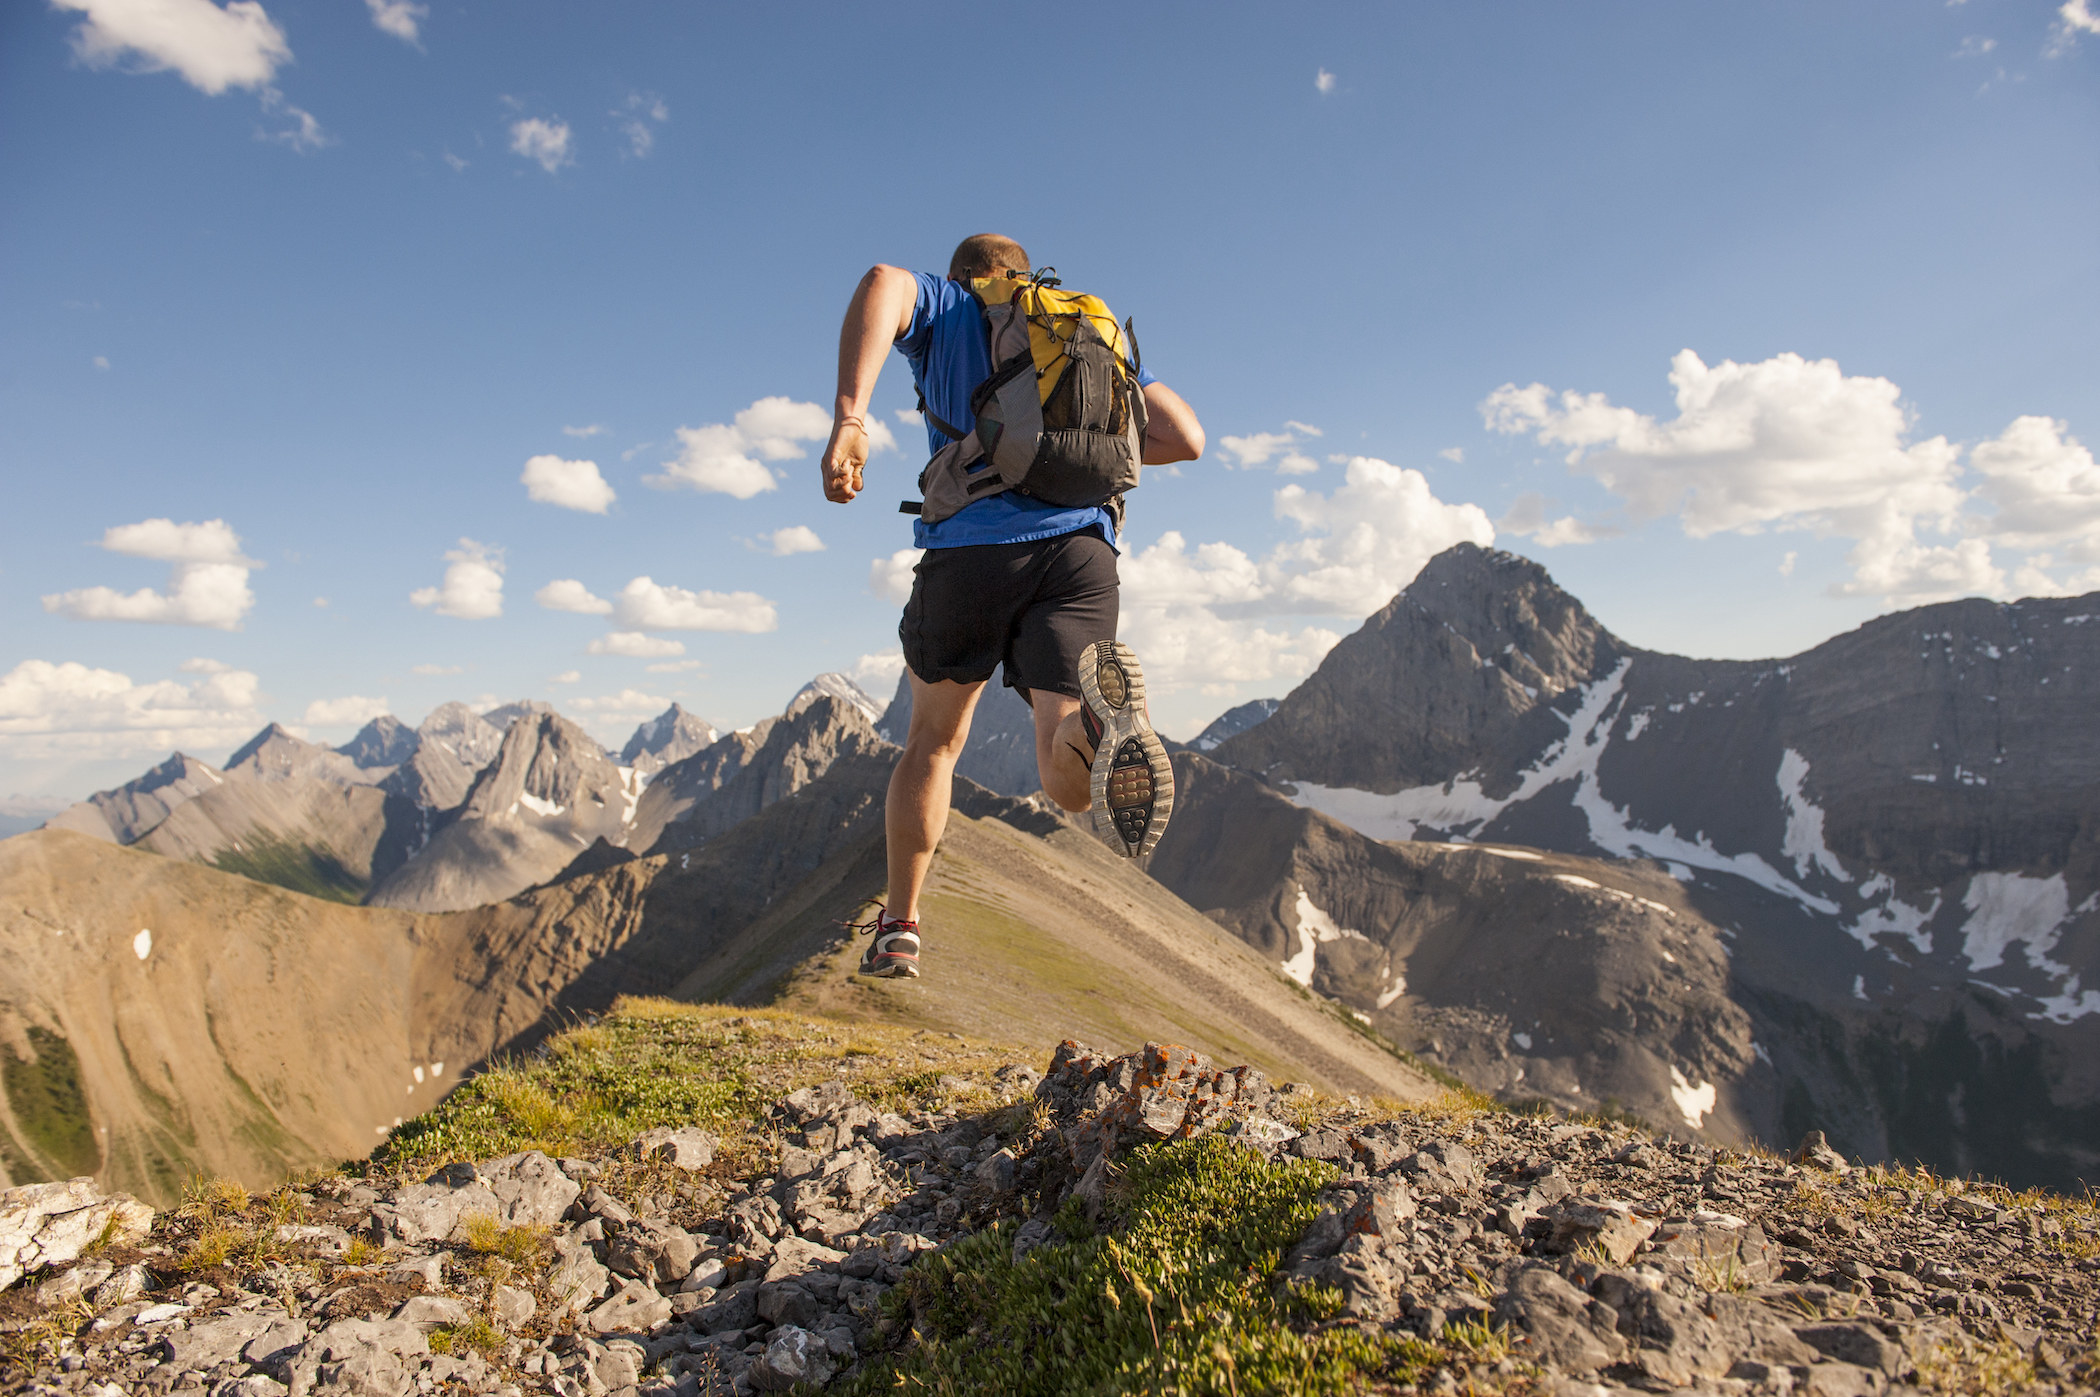 A man running through the mountains with a backpack on